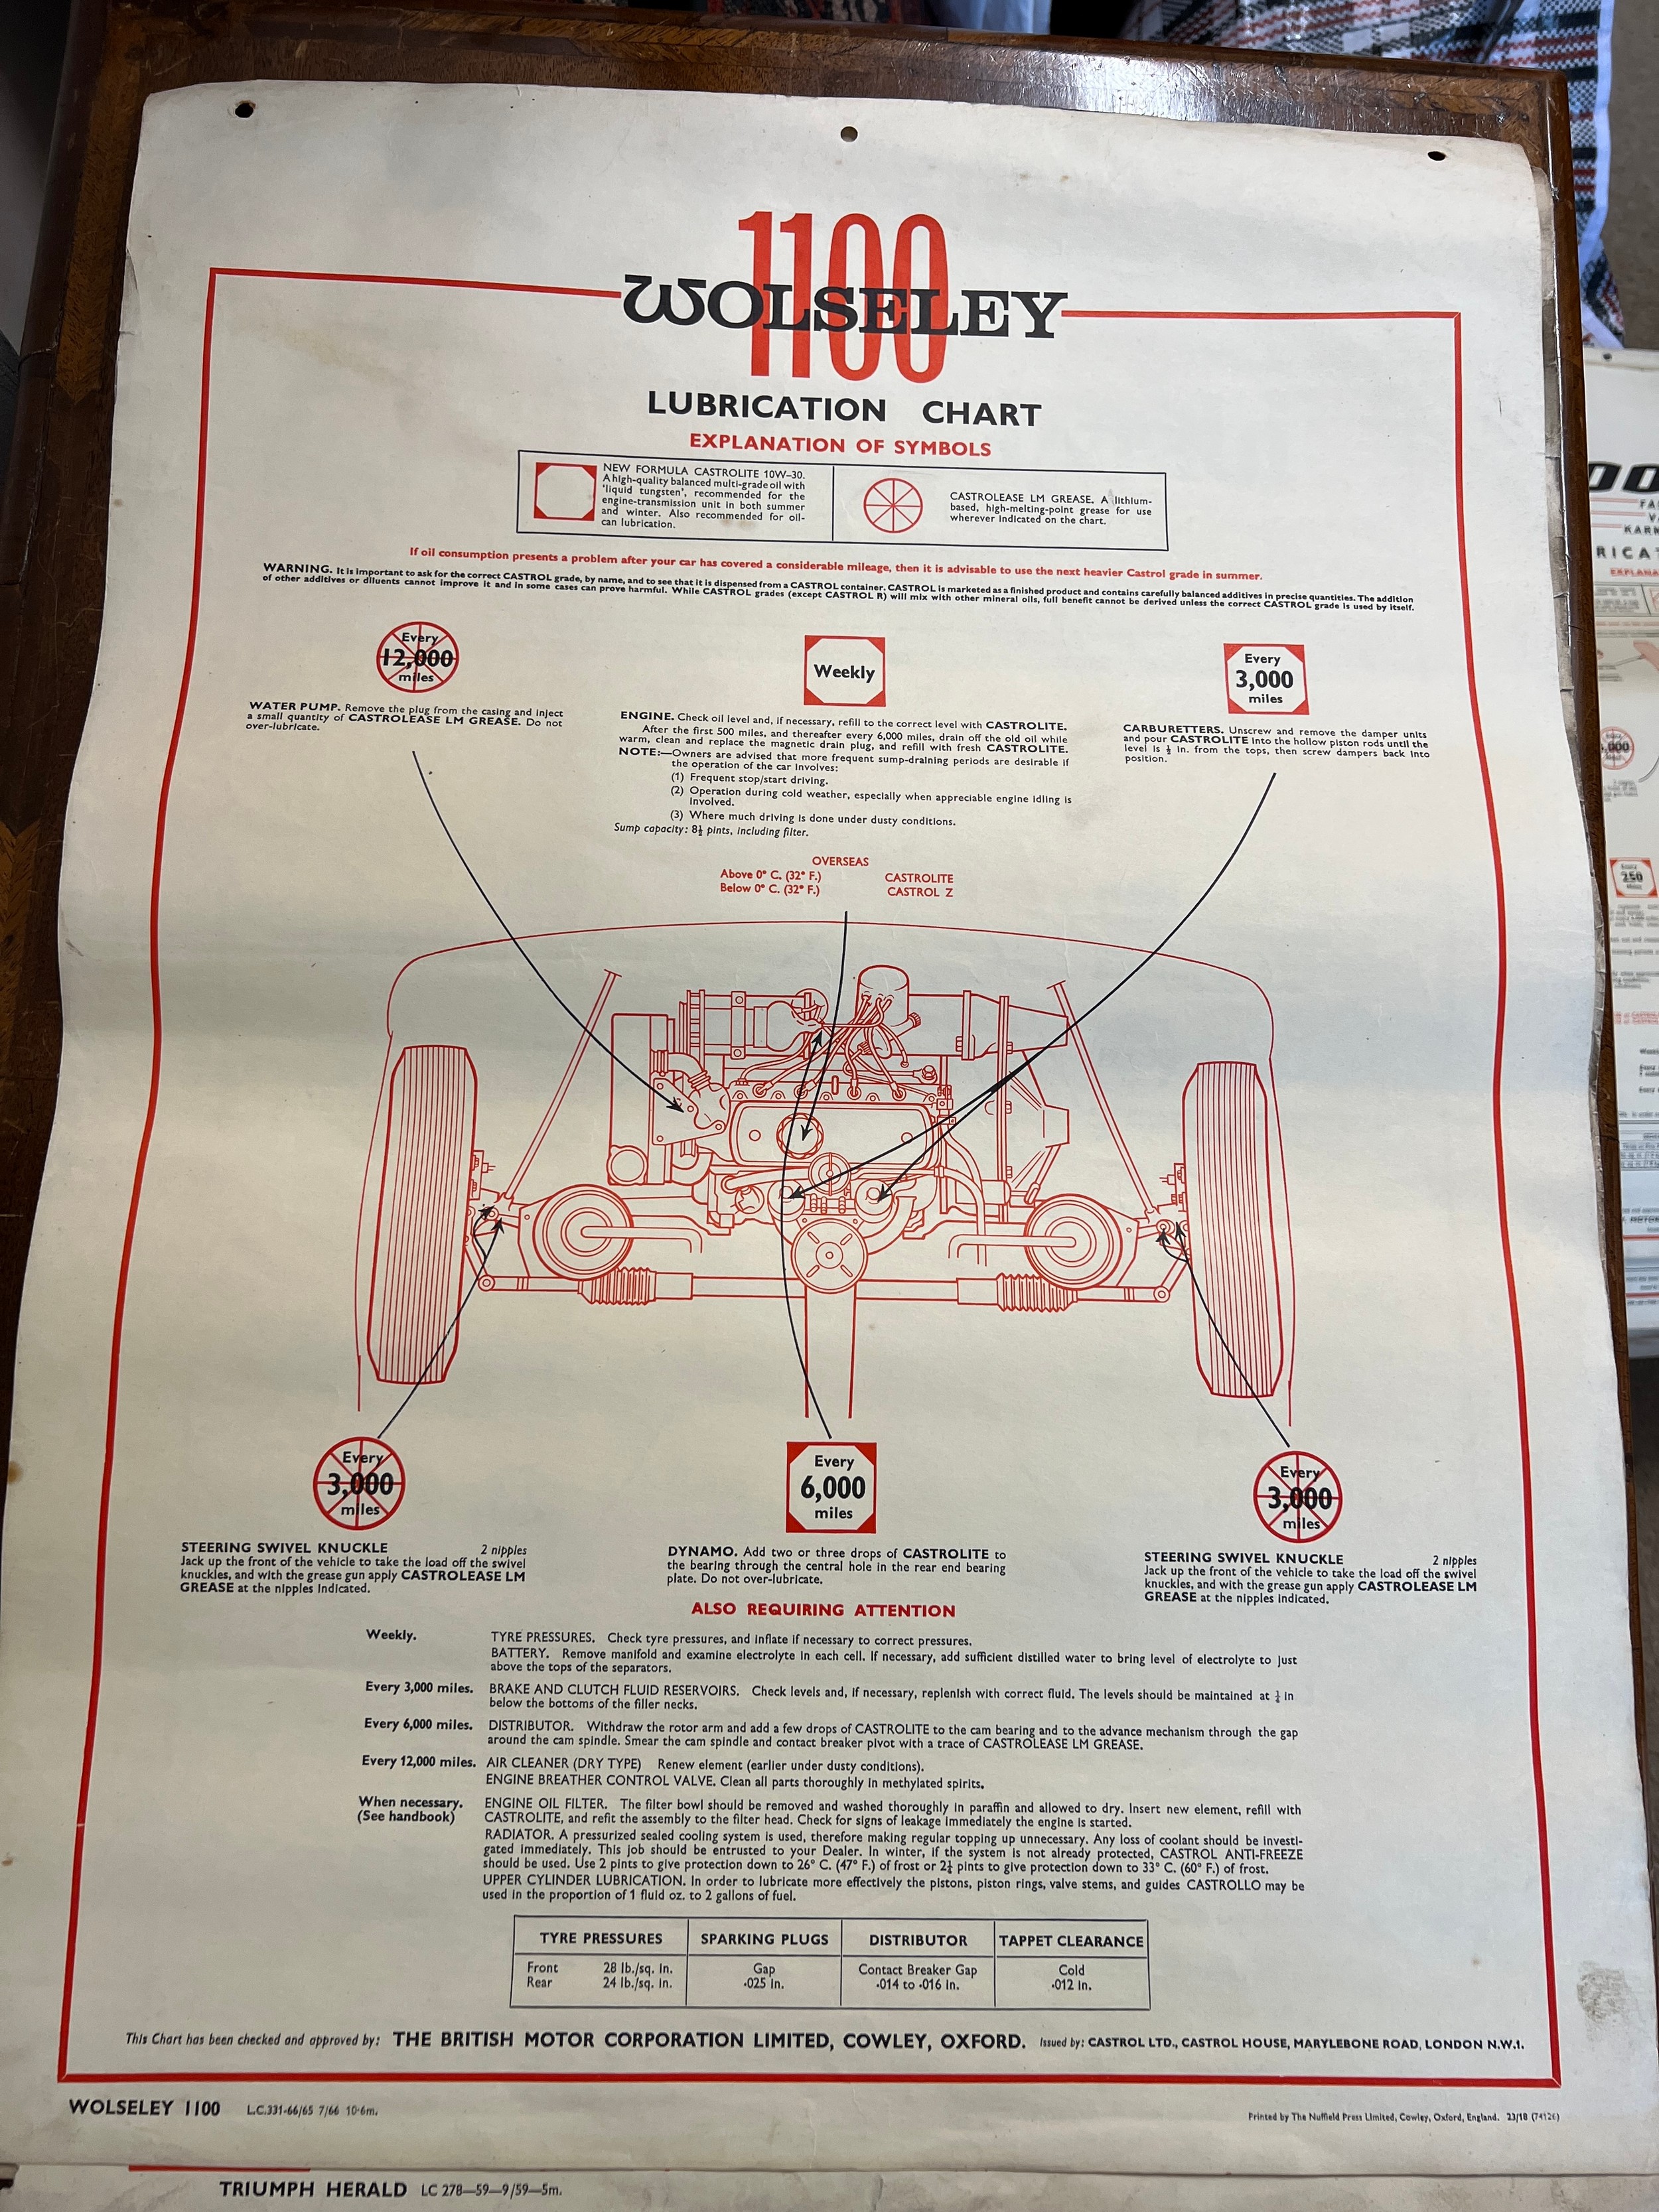 Thirty one vintage car lubrication charts to include Wolseley, Morris, MG 1100, Morris 1100, - Image 29 of 31